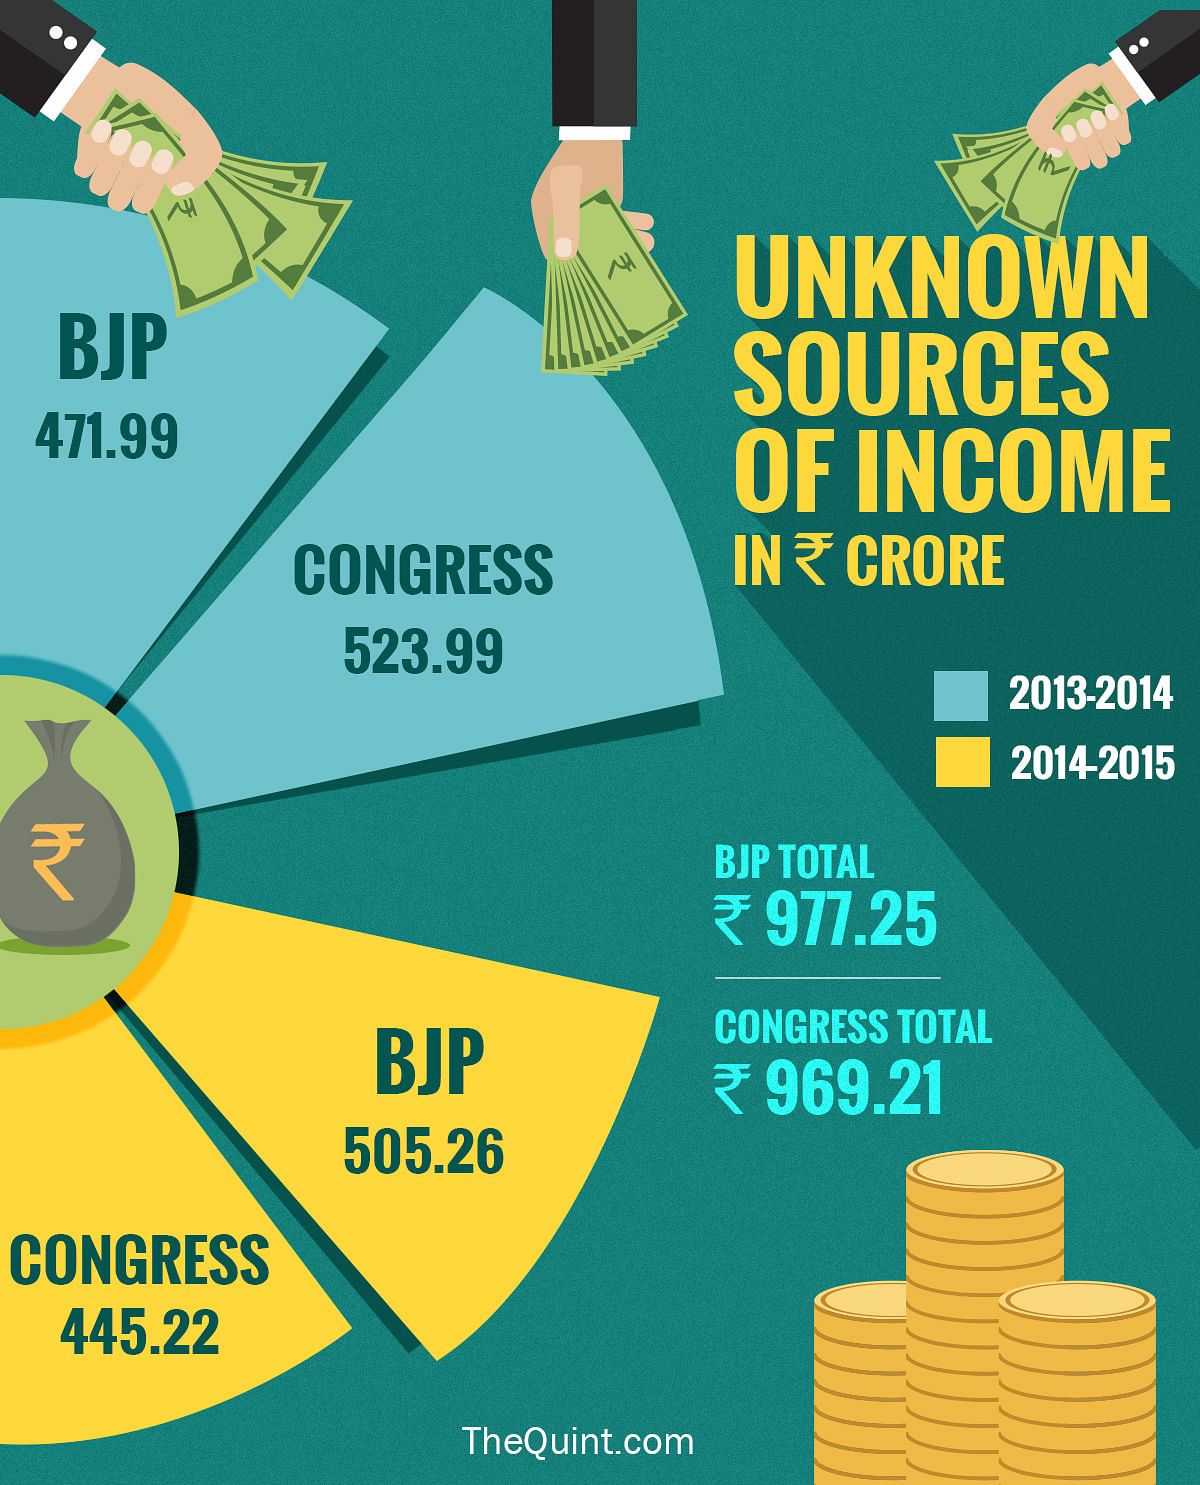 Both Congress and BJP have shown exemplary kinship to protect their source of funding from becoming public records.